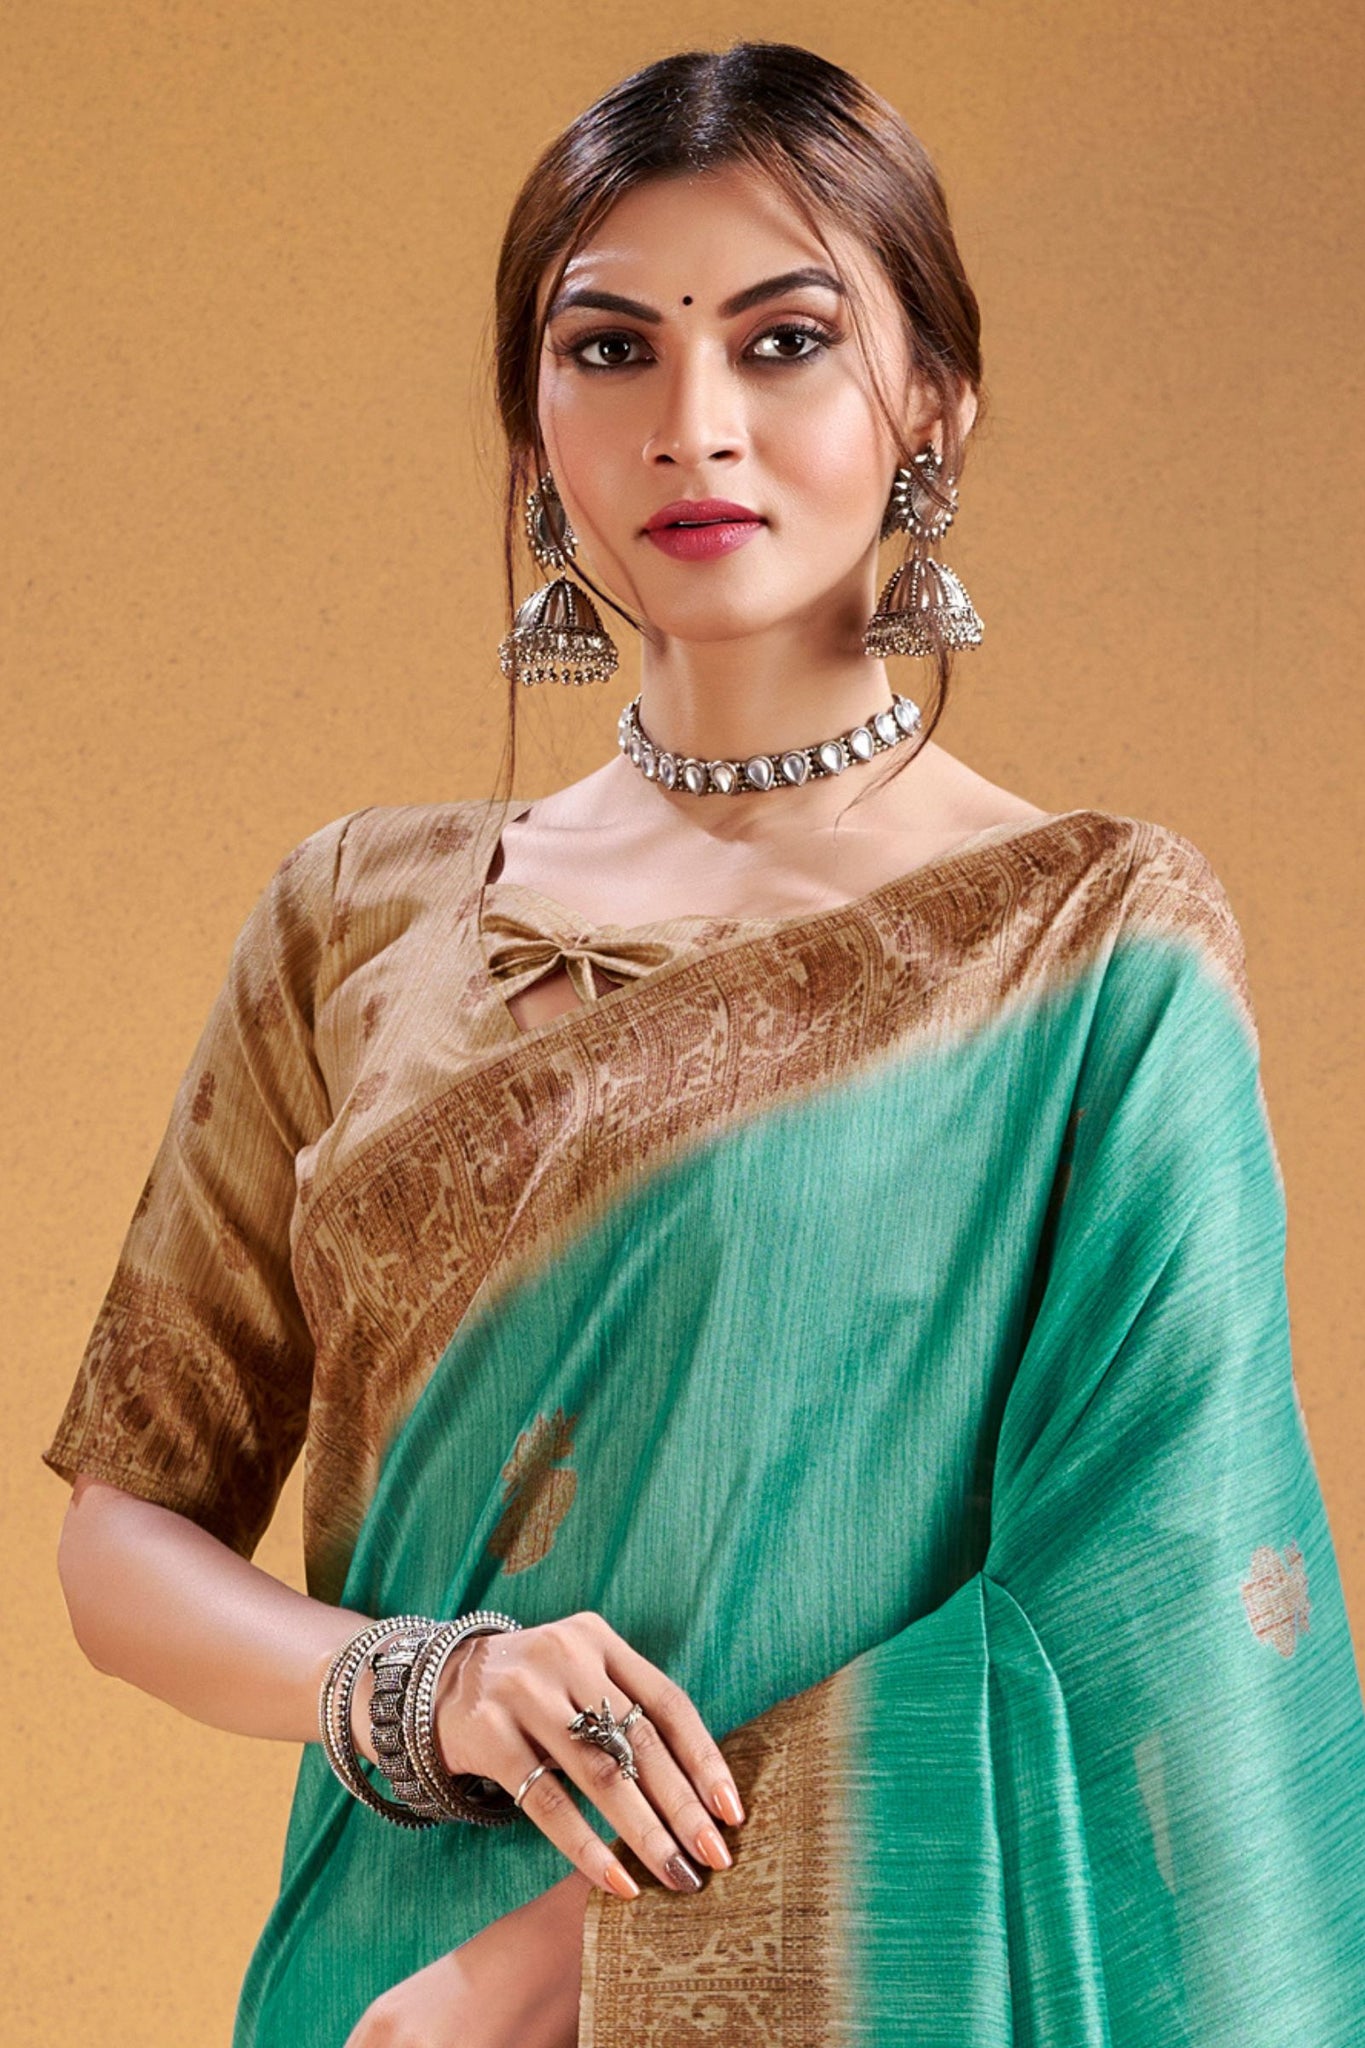 Sea Green Cotton Saree with Traditional Pattern